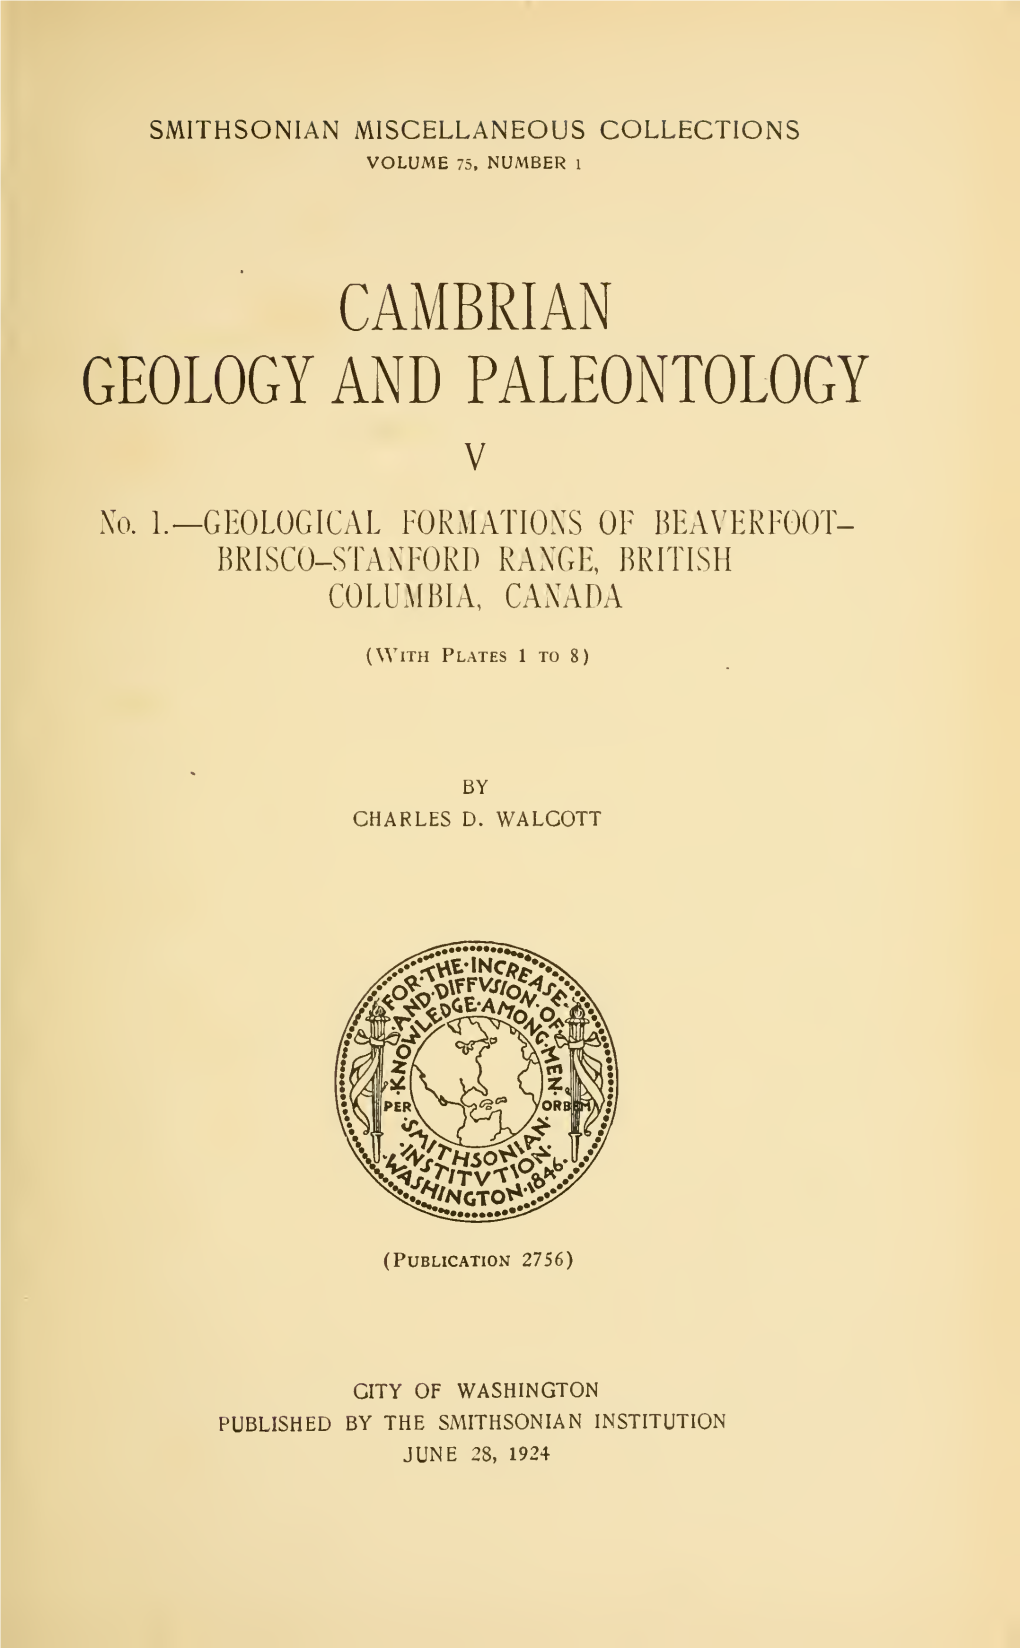 Cambrian Geology and Paleontology V